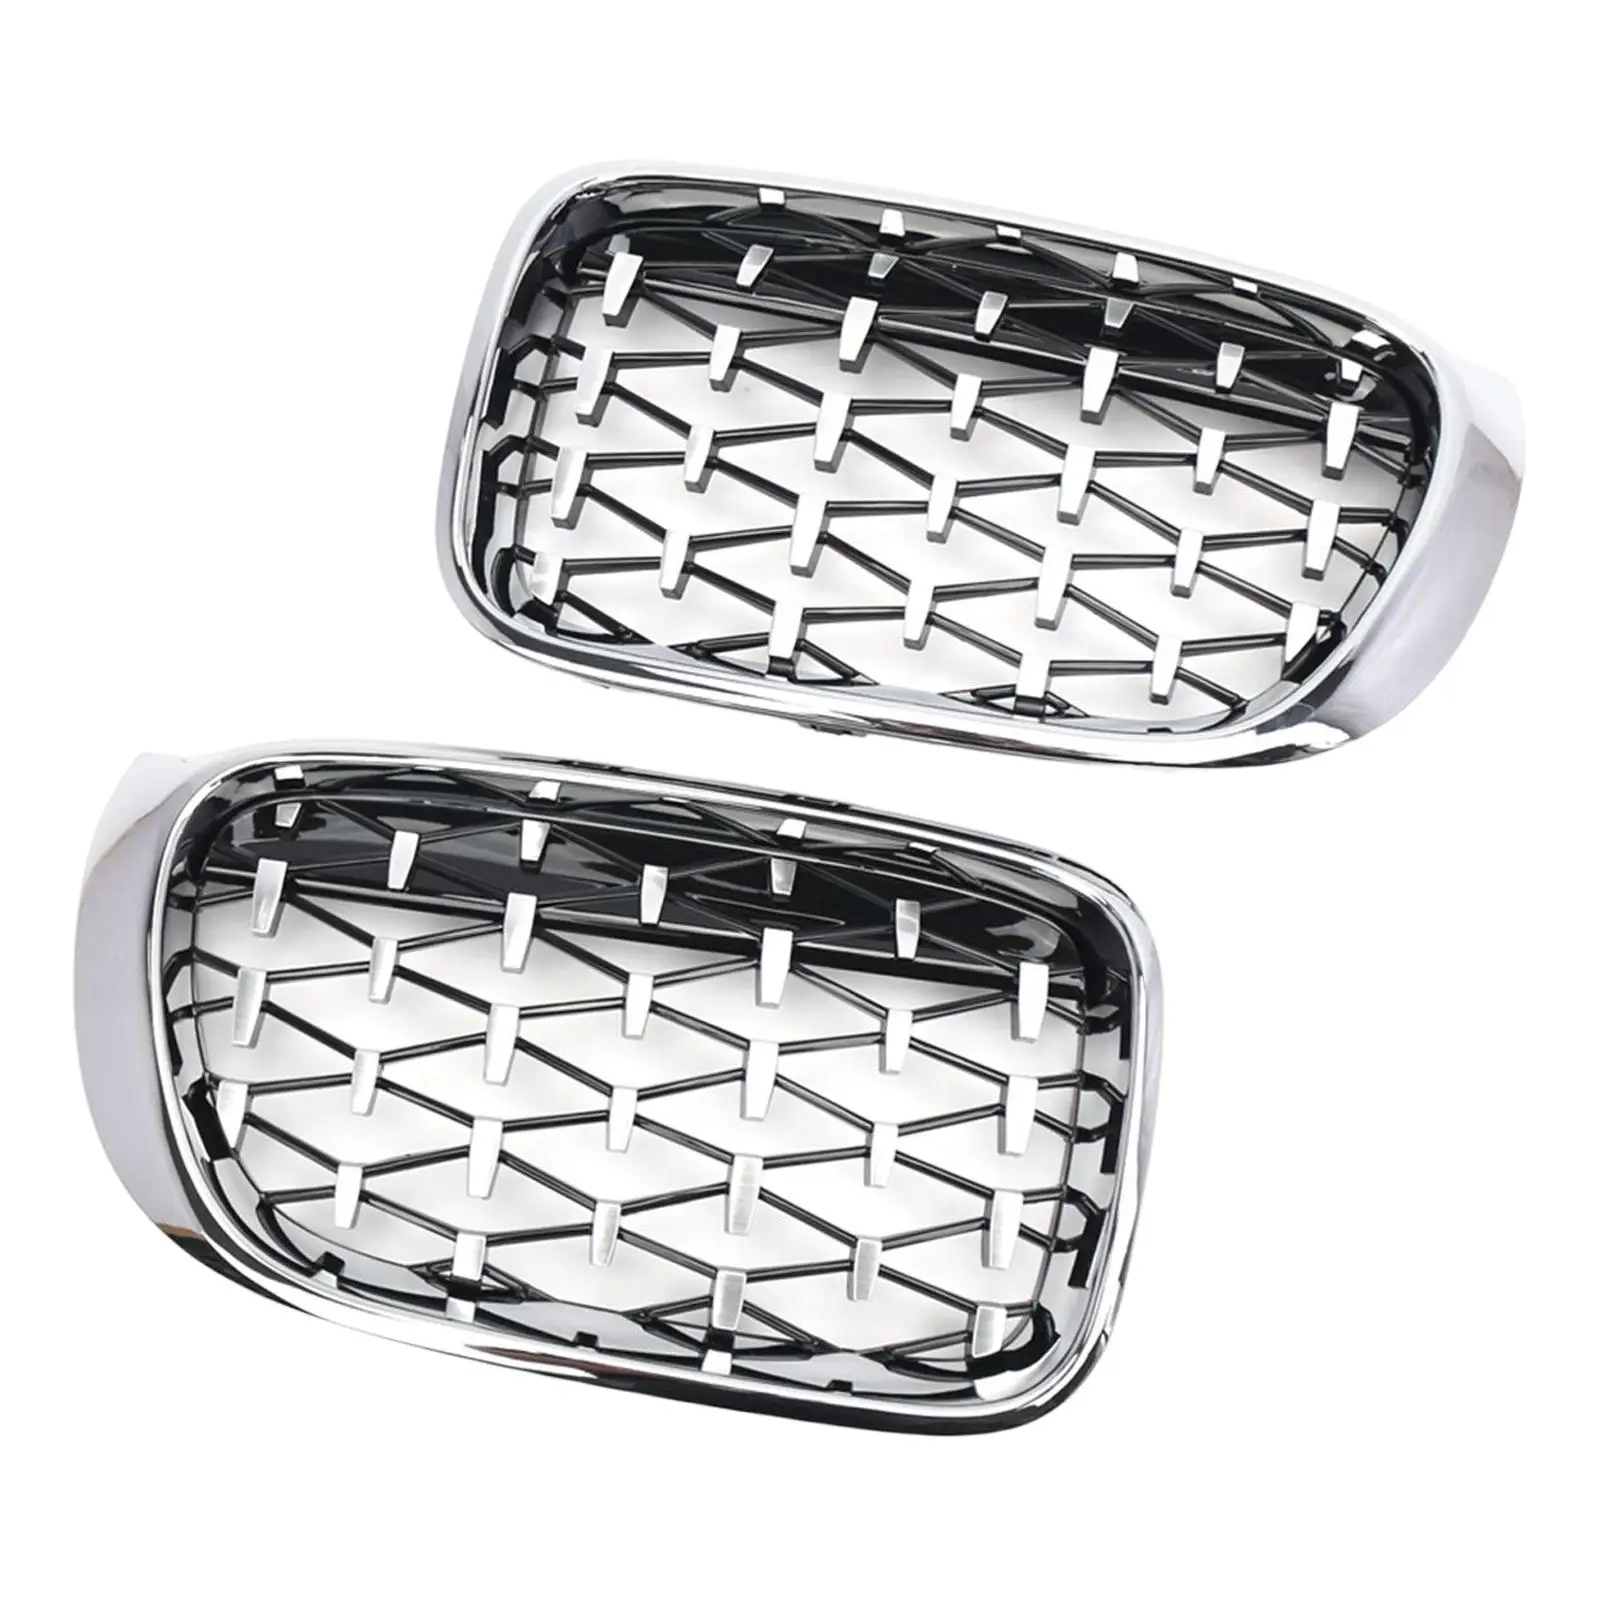 51137367422 51137367421 Easy to Install Accessories Durable Front Black Kidney Grille Grill for BMW x4 x3 F25 F26 2014-2018